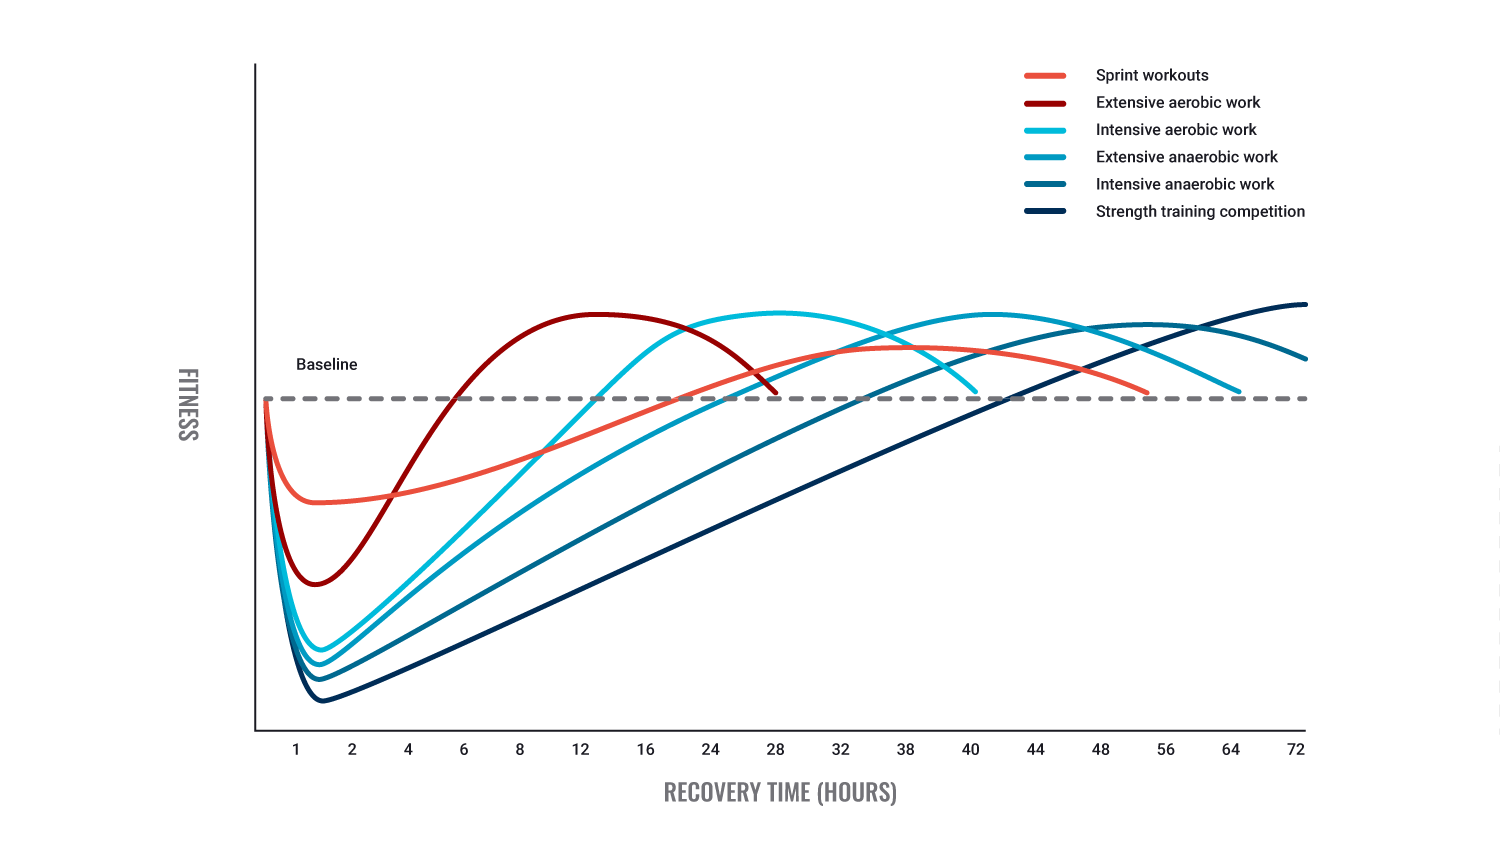 chart showing recovery times for different exercise types